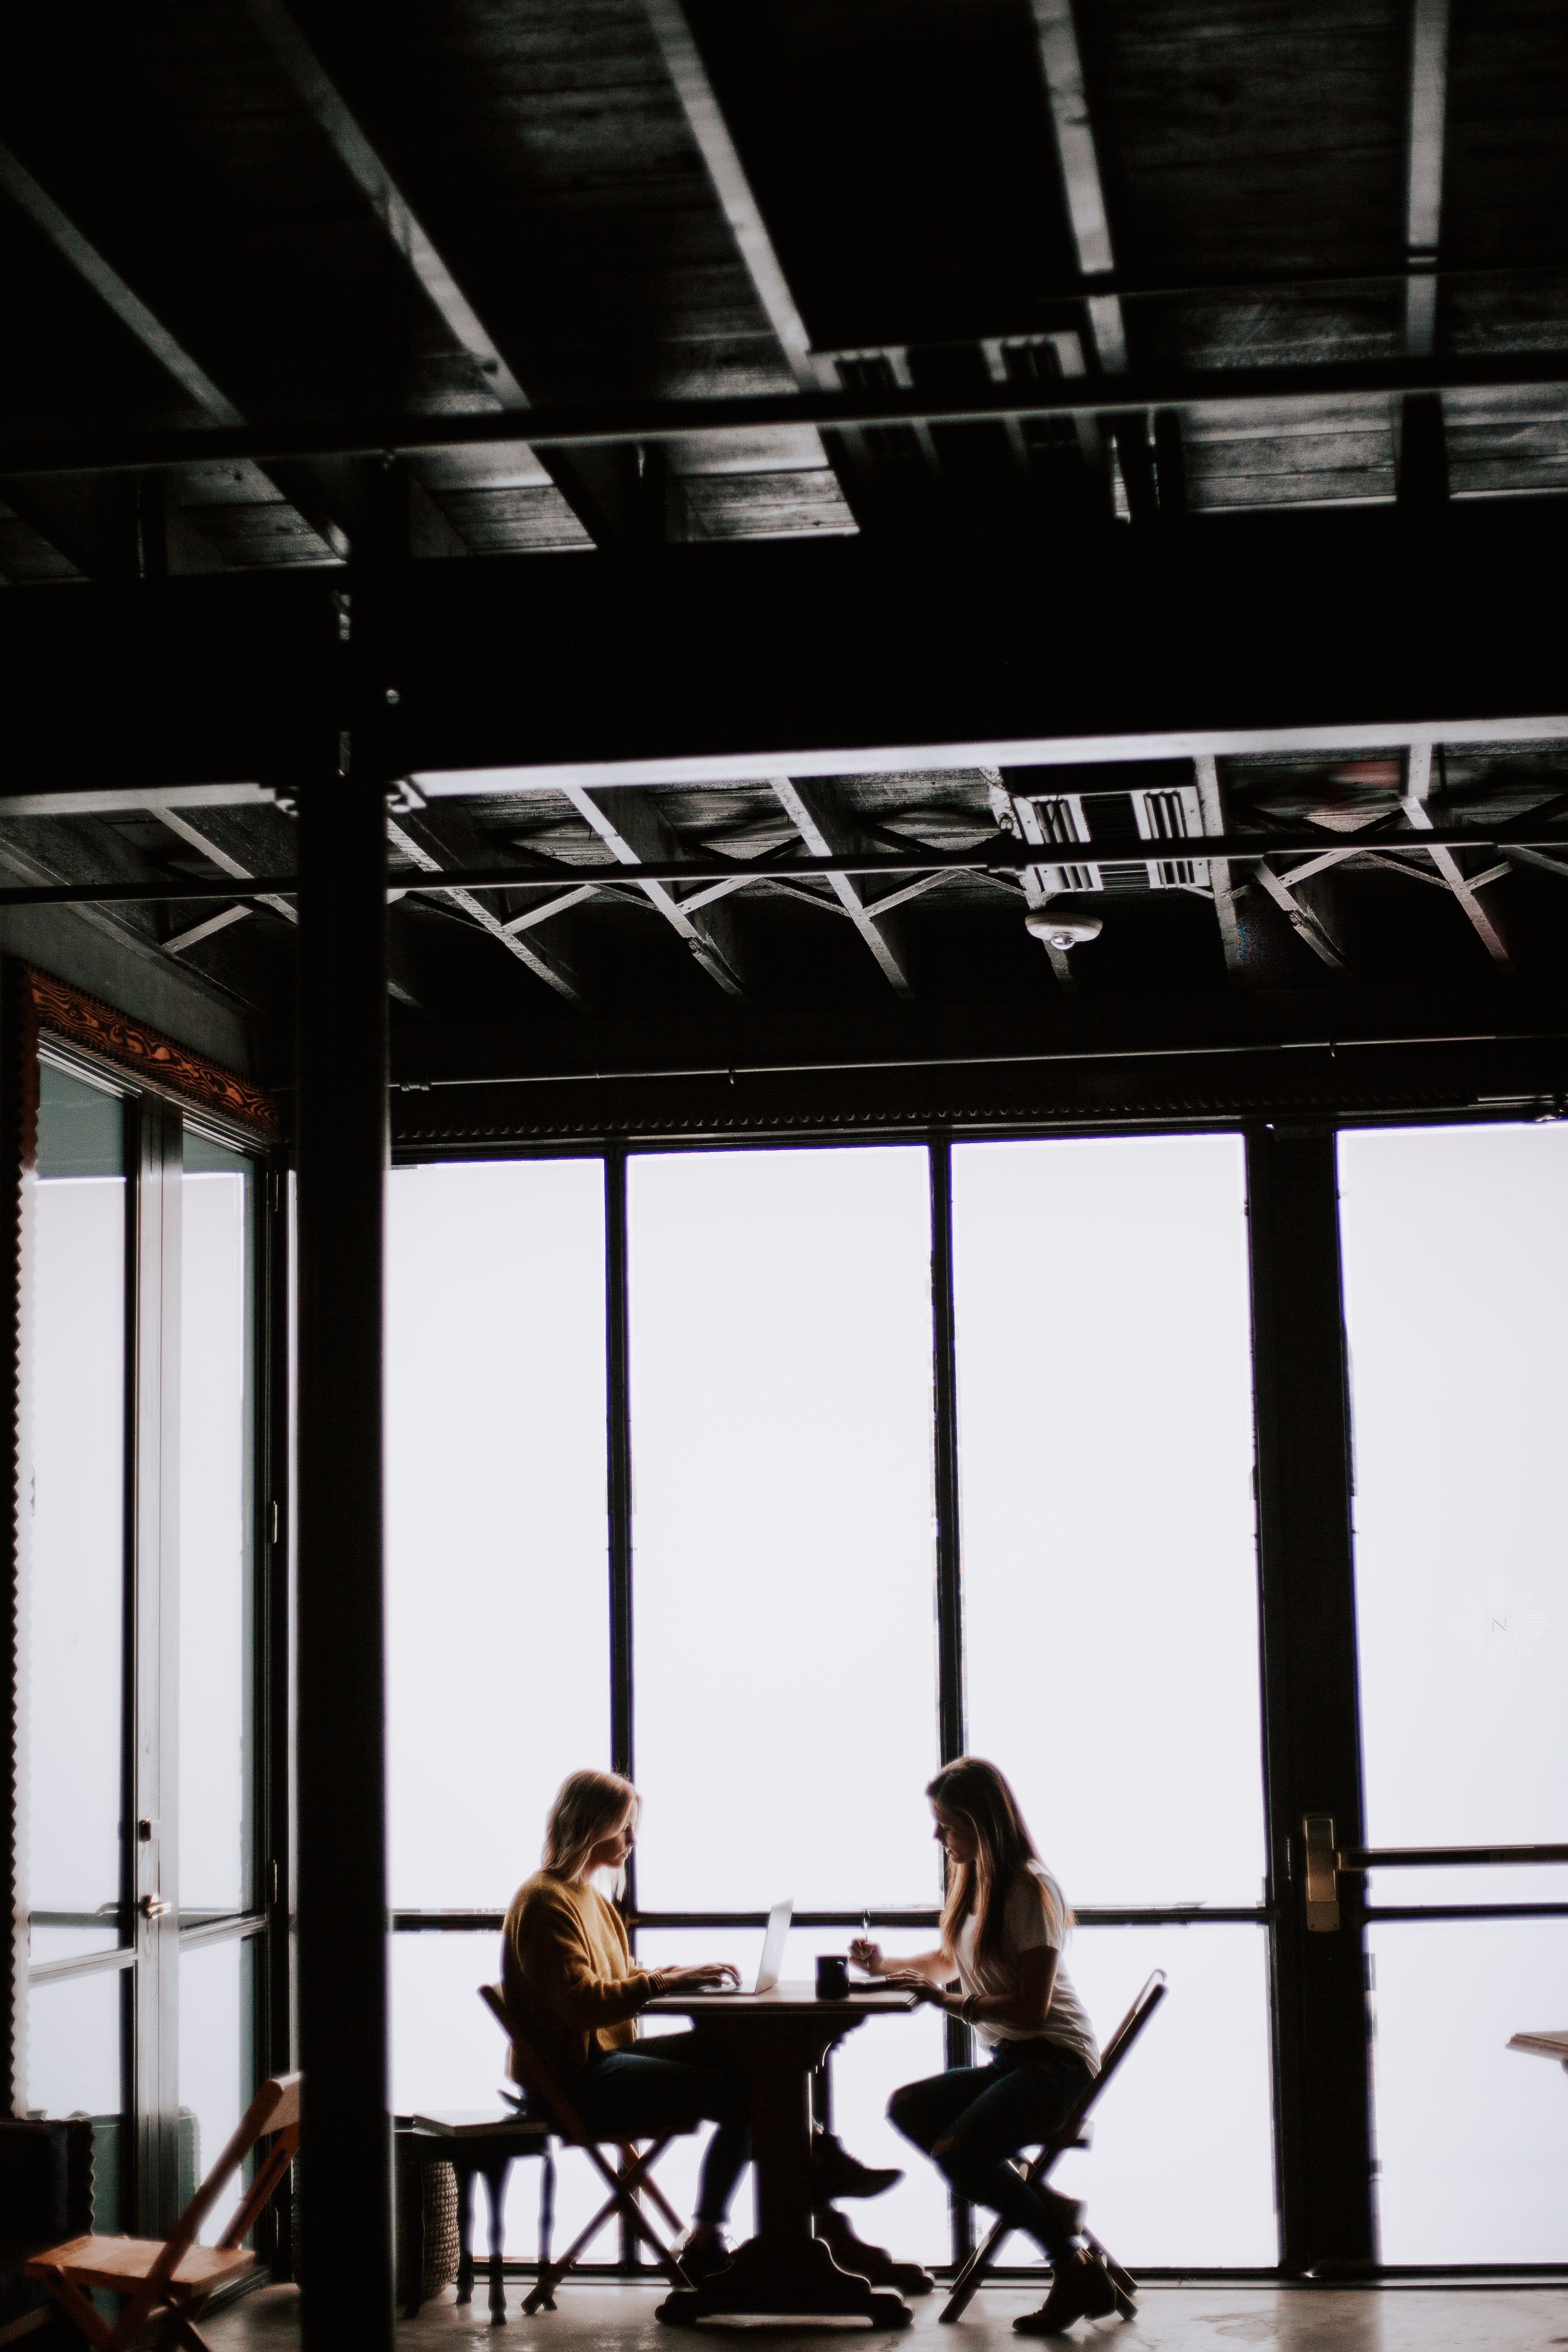 Two young women talking in a café | Photo: Unsplash